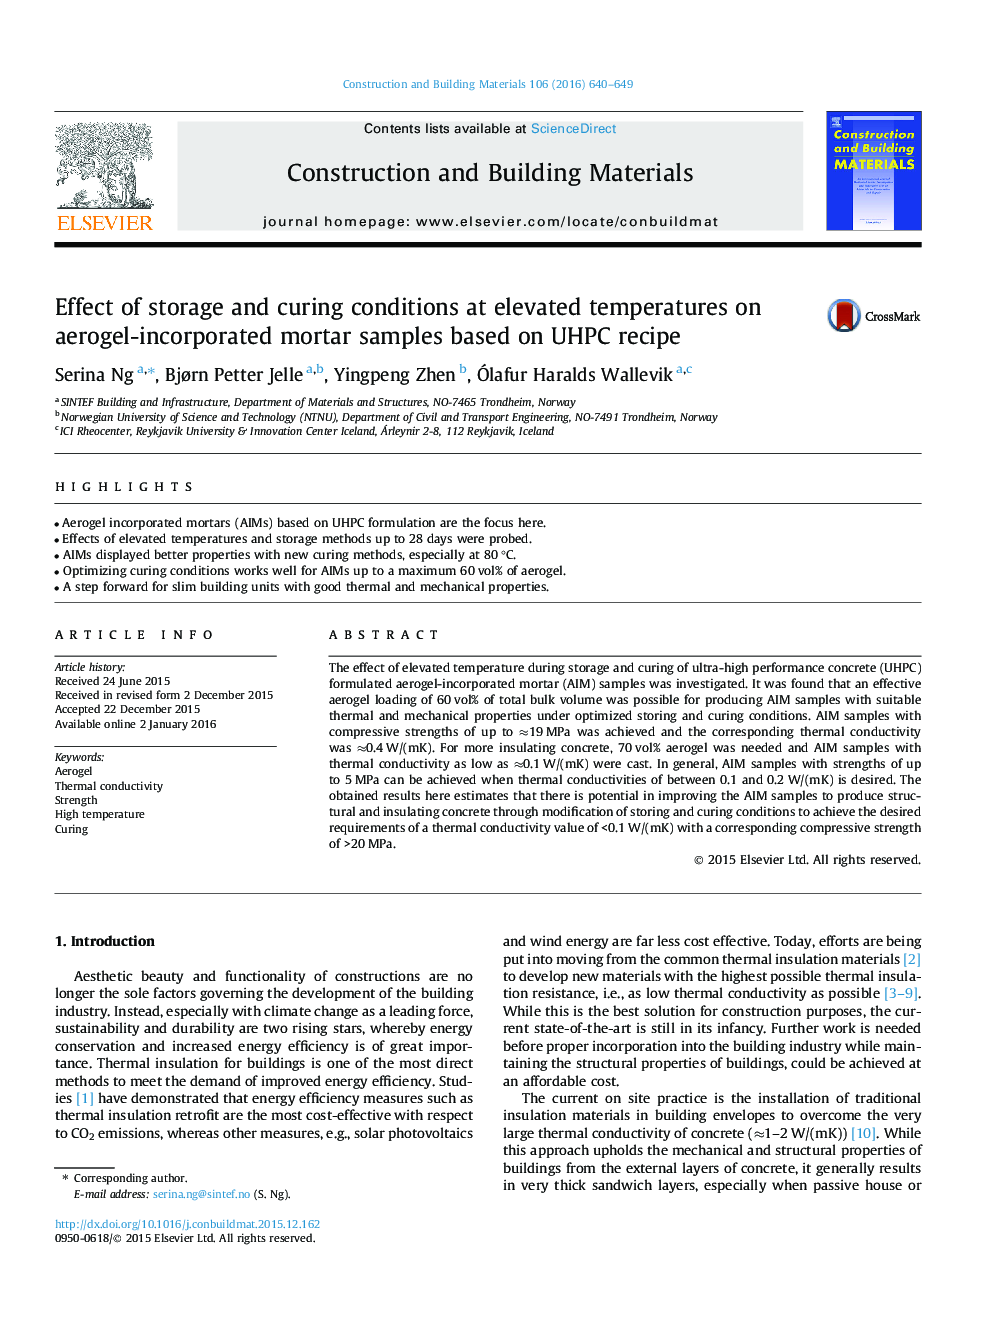 Effect of storage and curing conditions at elevated temperatures on aerogel-incorporated mortar samples based on UHPC recipe